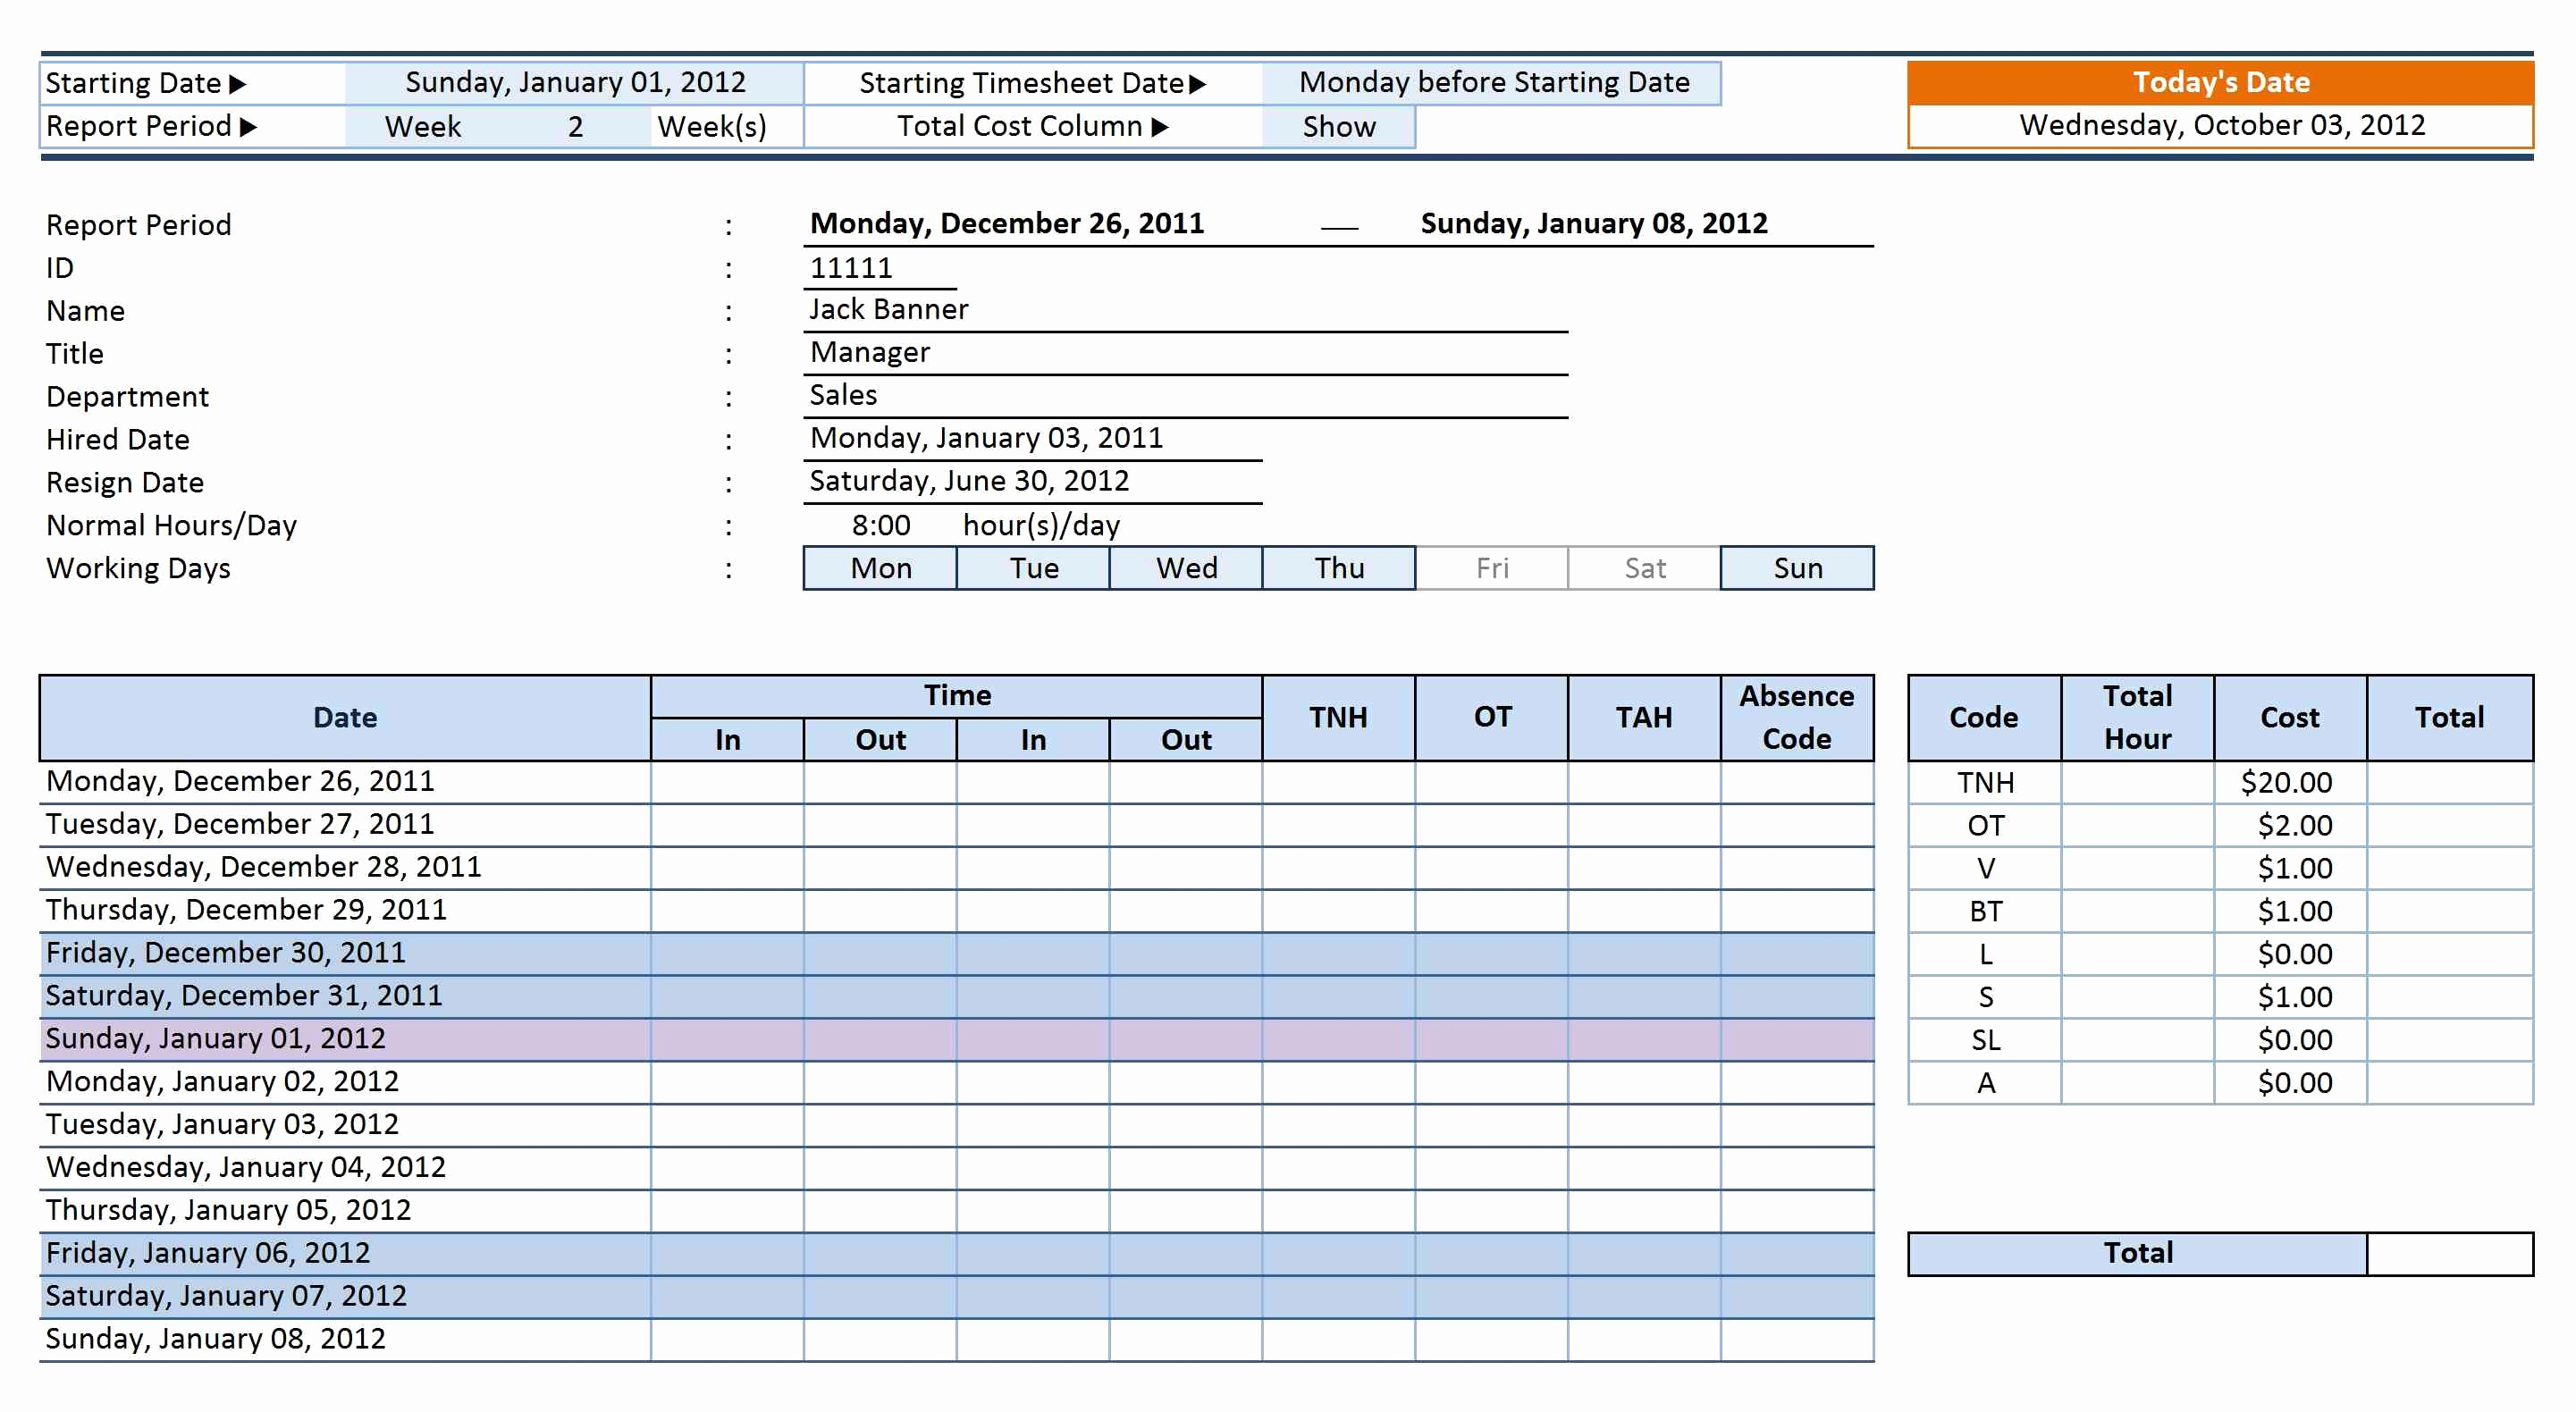 Employee Relations Tracking Spreadsheet Template With Regard To 50 Awesome Employee Relations Tracking Template  Document Ideas